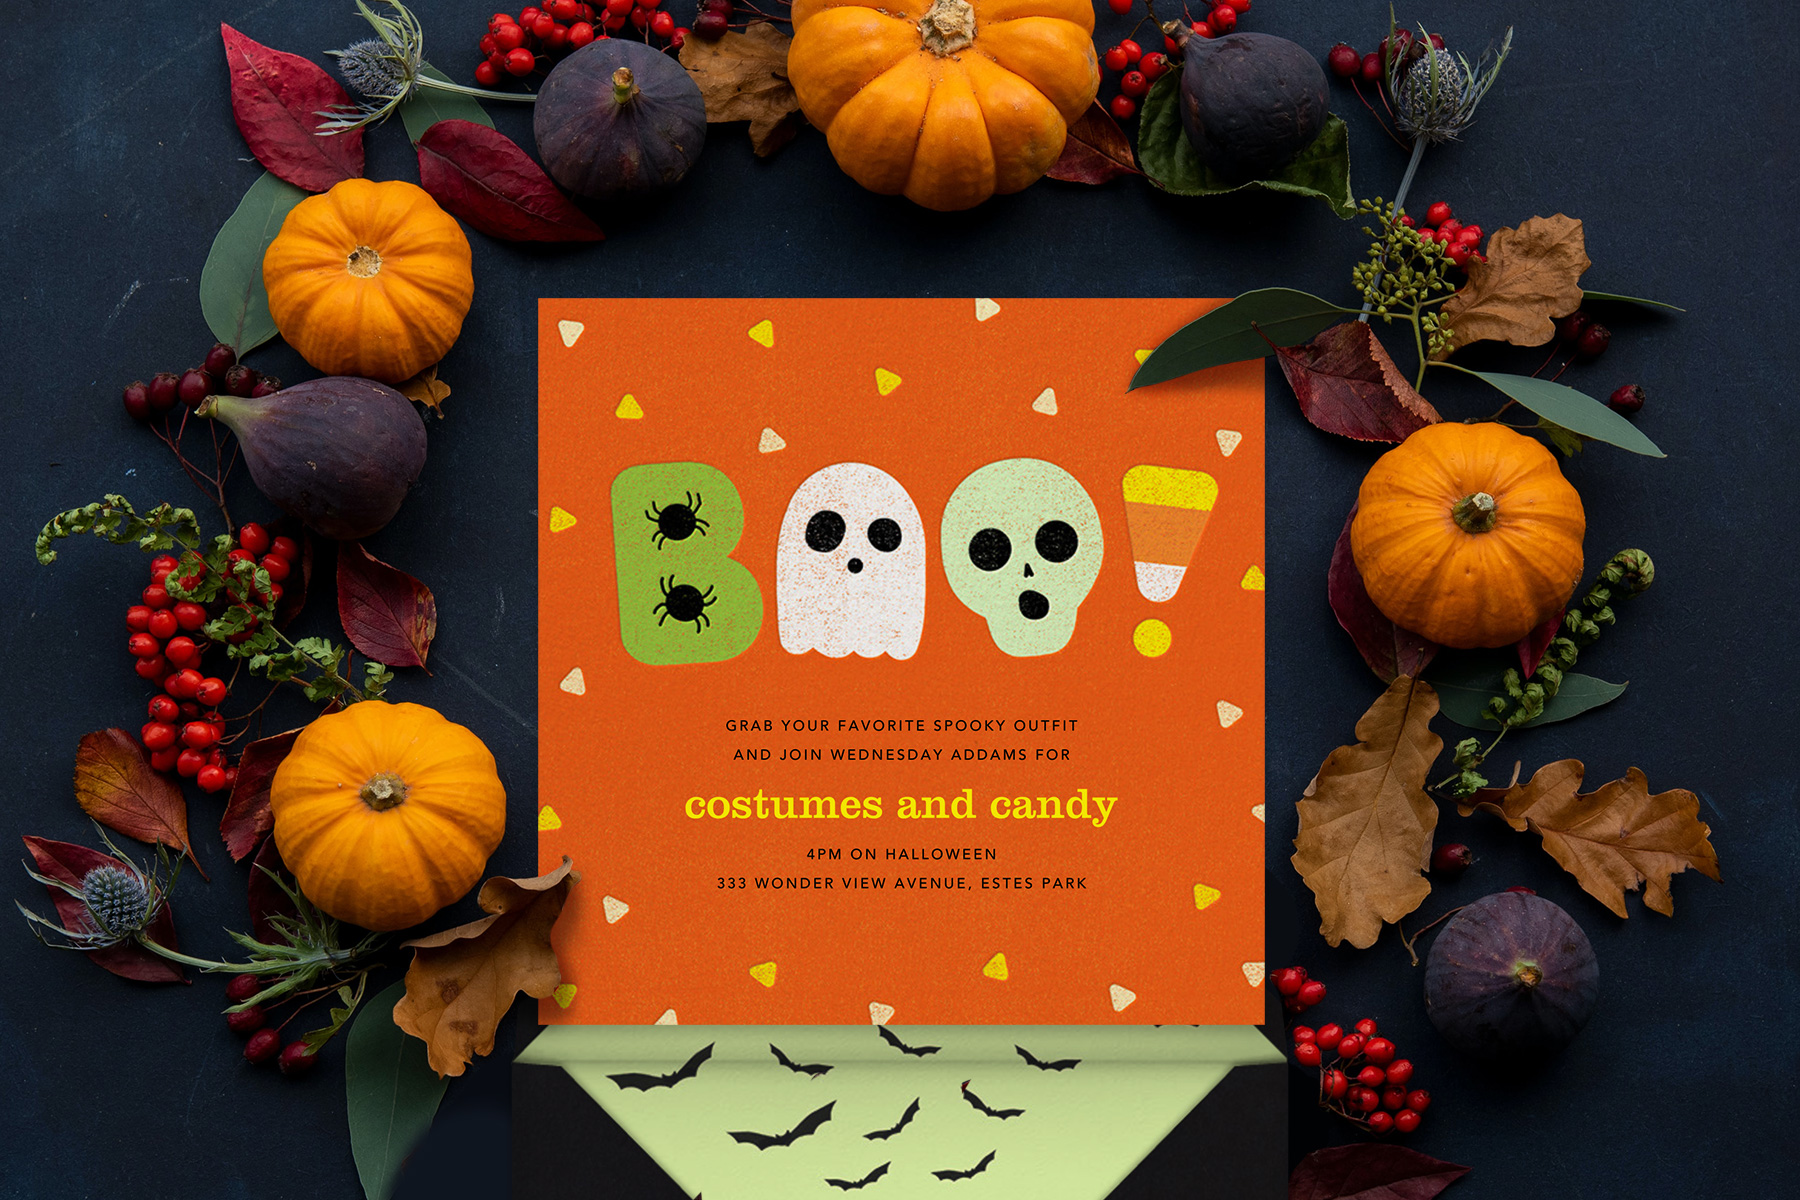 “Candy Dandy” invitation by Paperless Post. Orange card featuring an illustration of the word “Boo!” made out of spiders, a ghost, a skeleton, and a candy corn. The dark background is accented with a beautiful autumnal wreath of gourds, berries, and leaves.